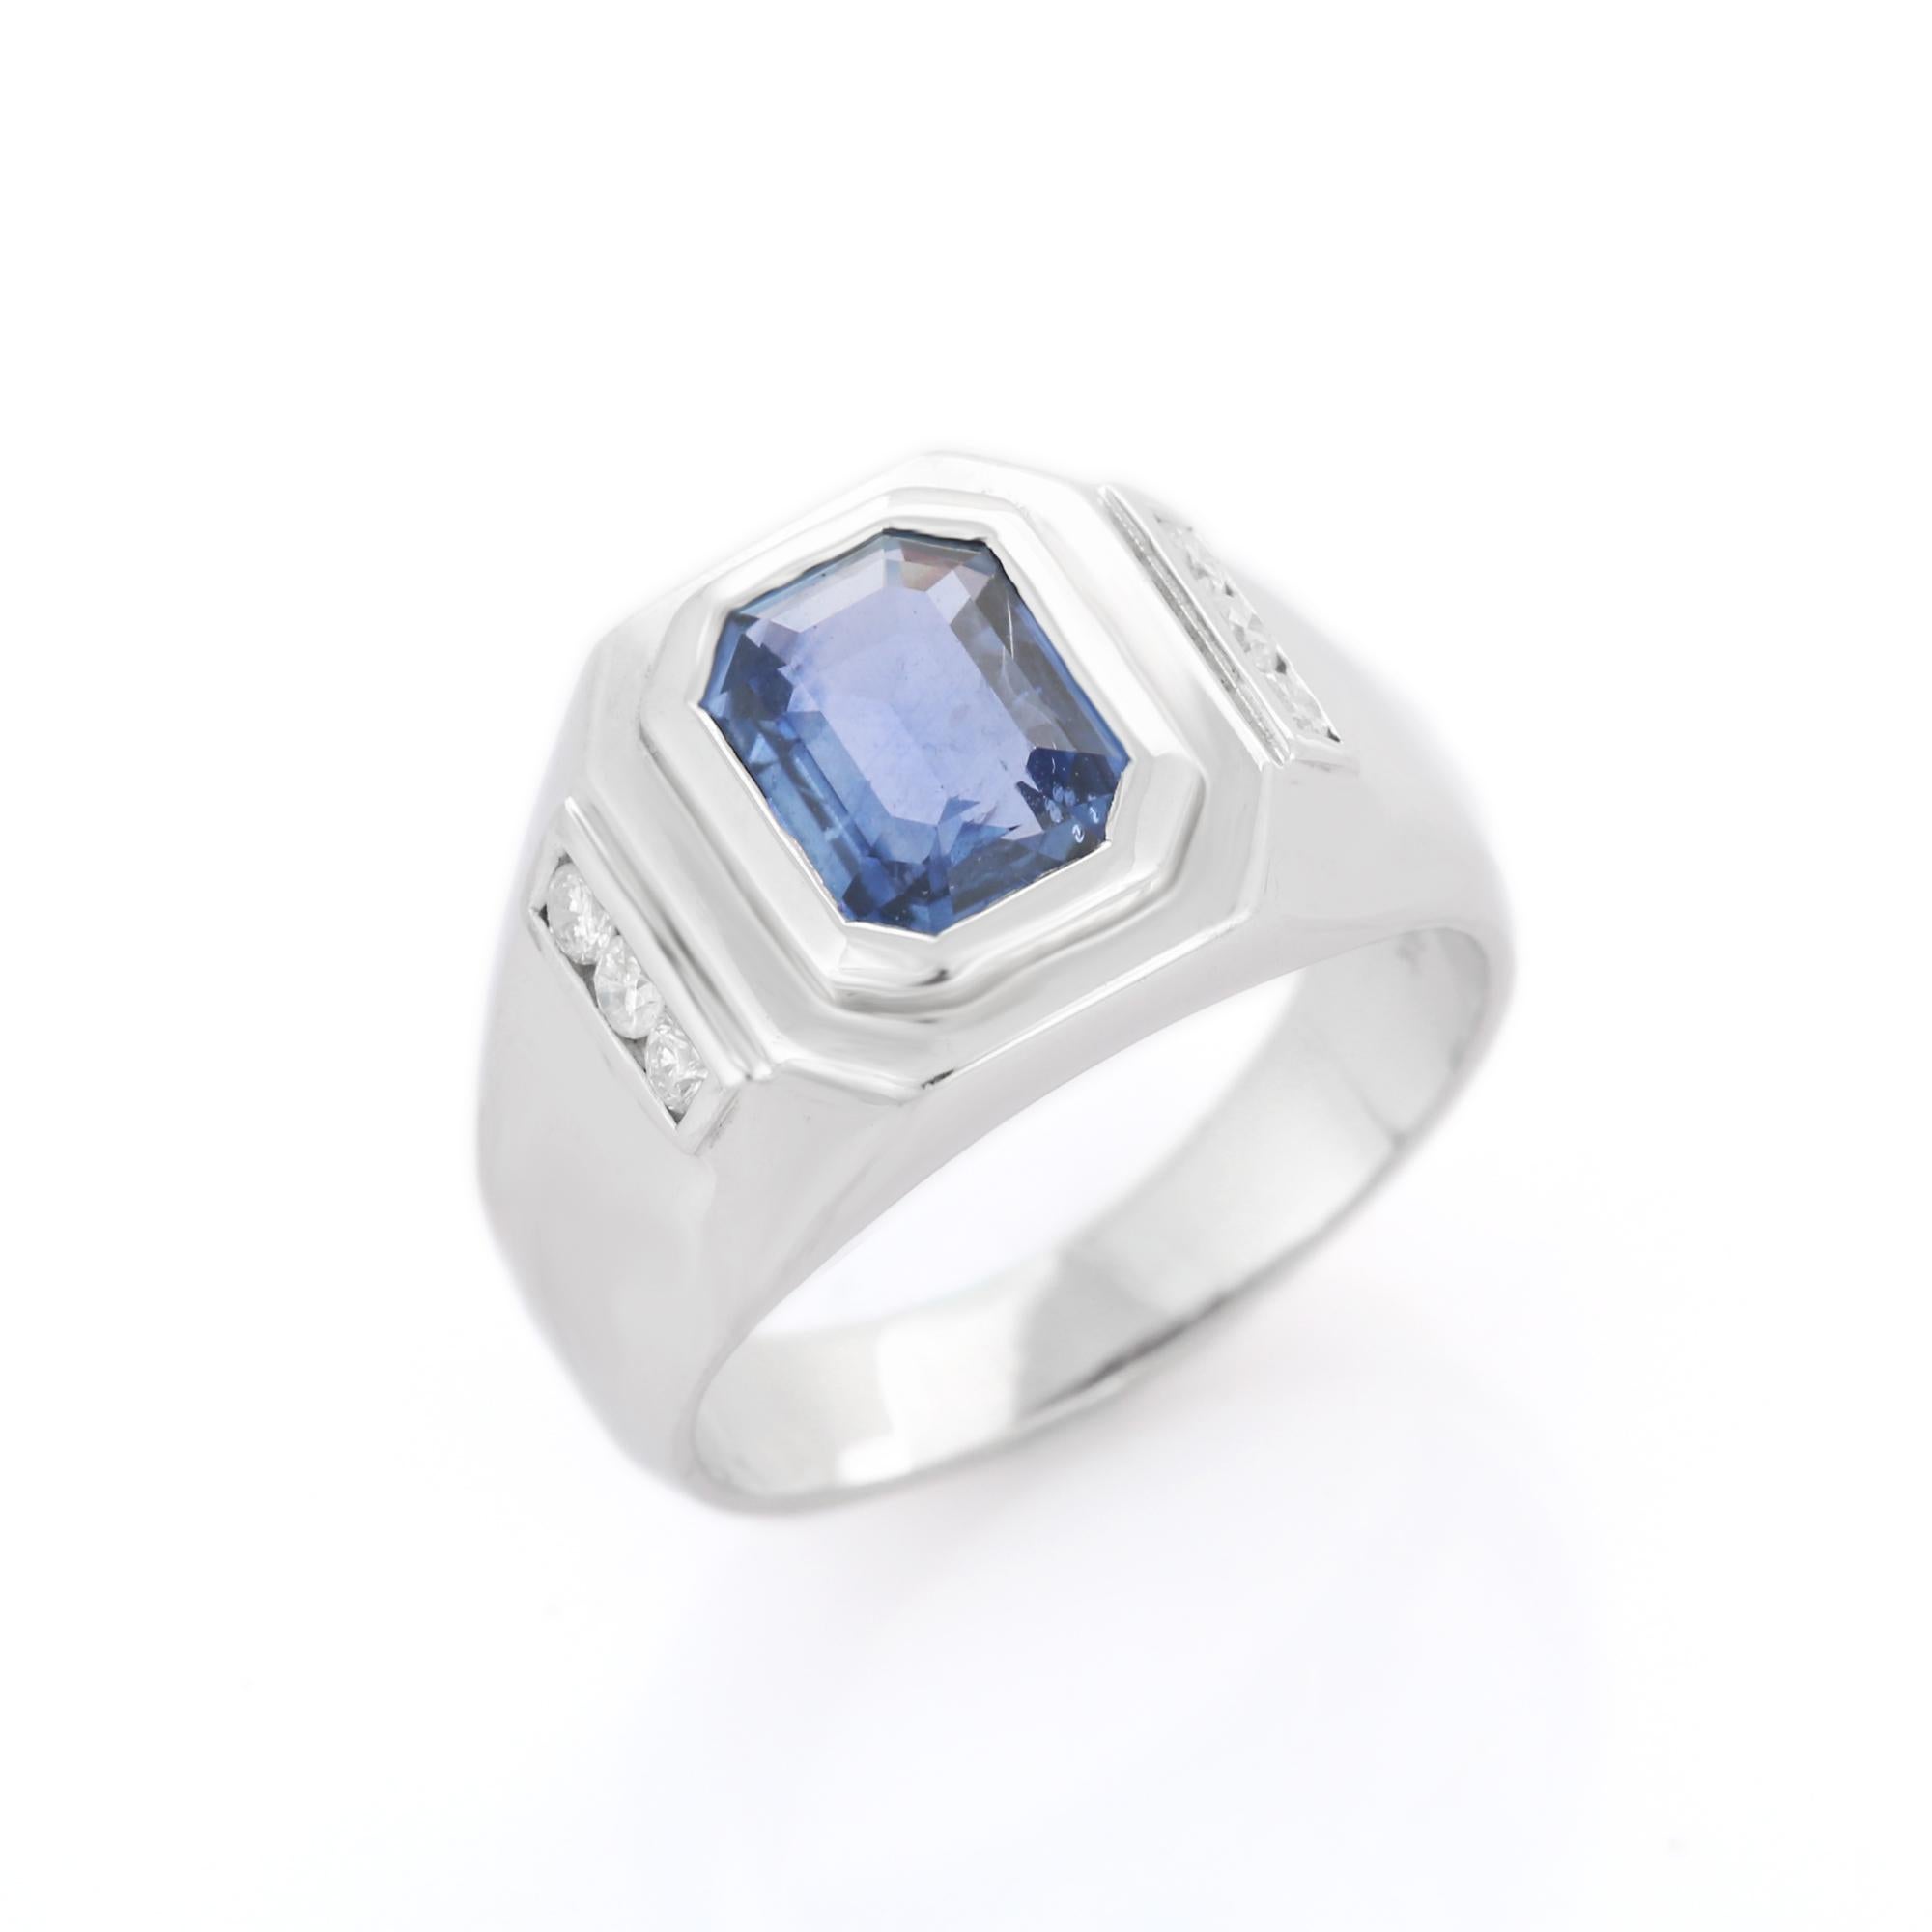 For Sale:  Statement Blue Sapphire and Diamond Men's Wedding Ring 18k White Gold 2